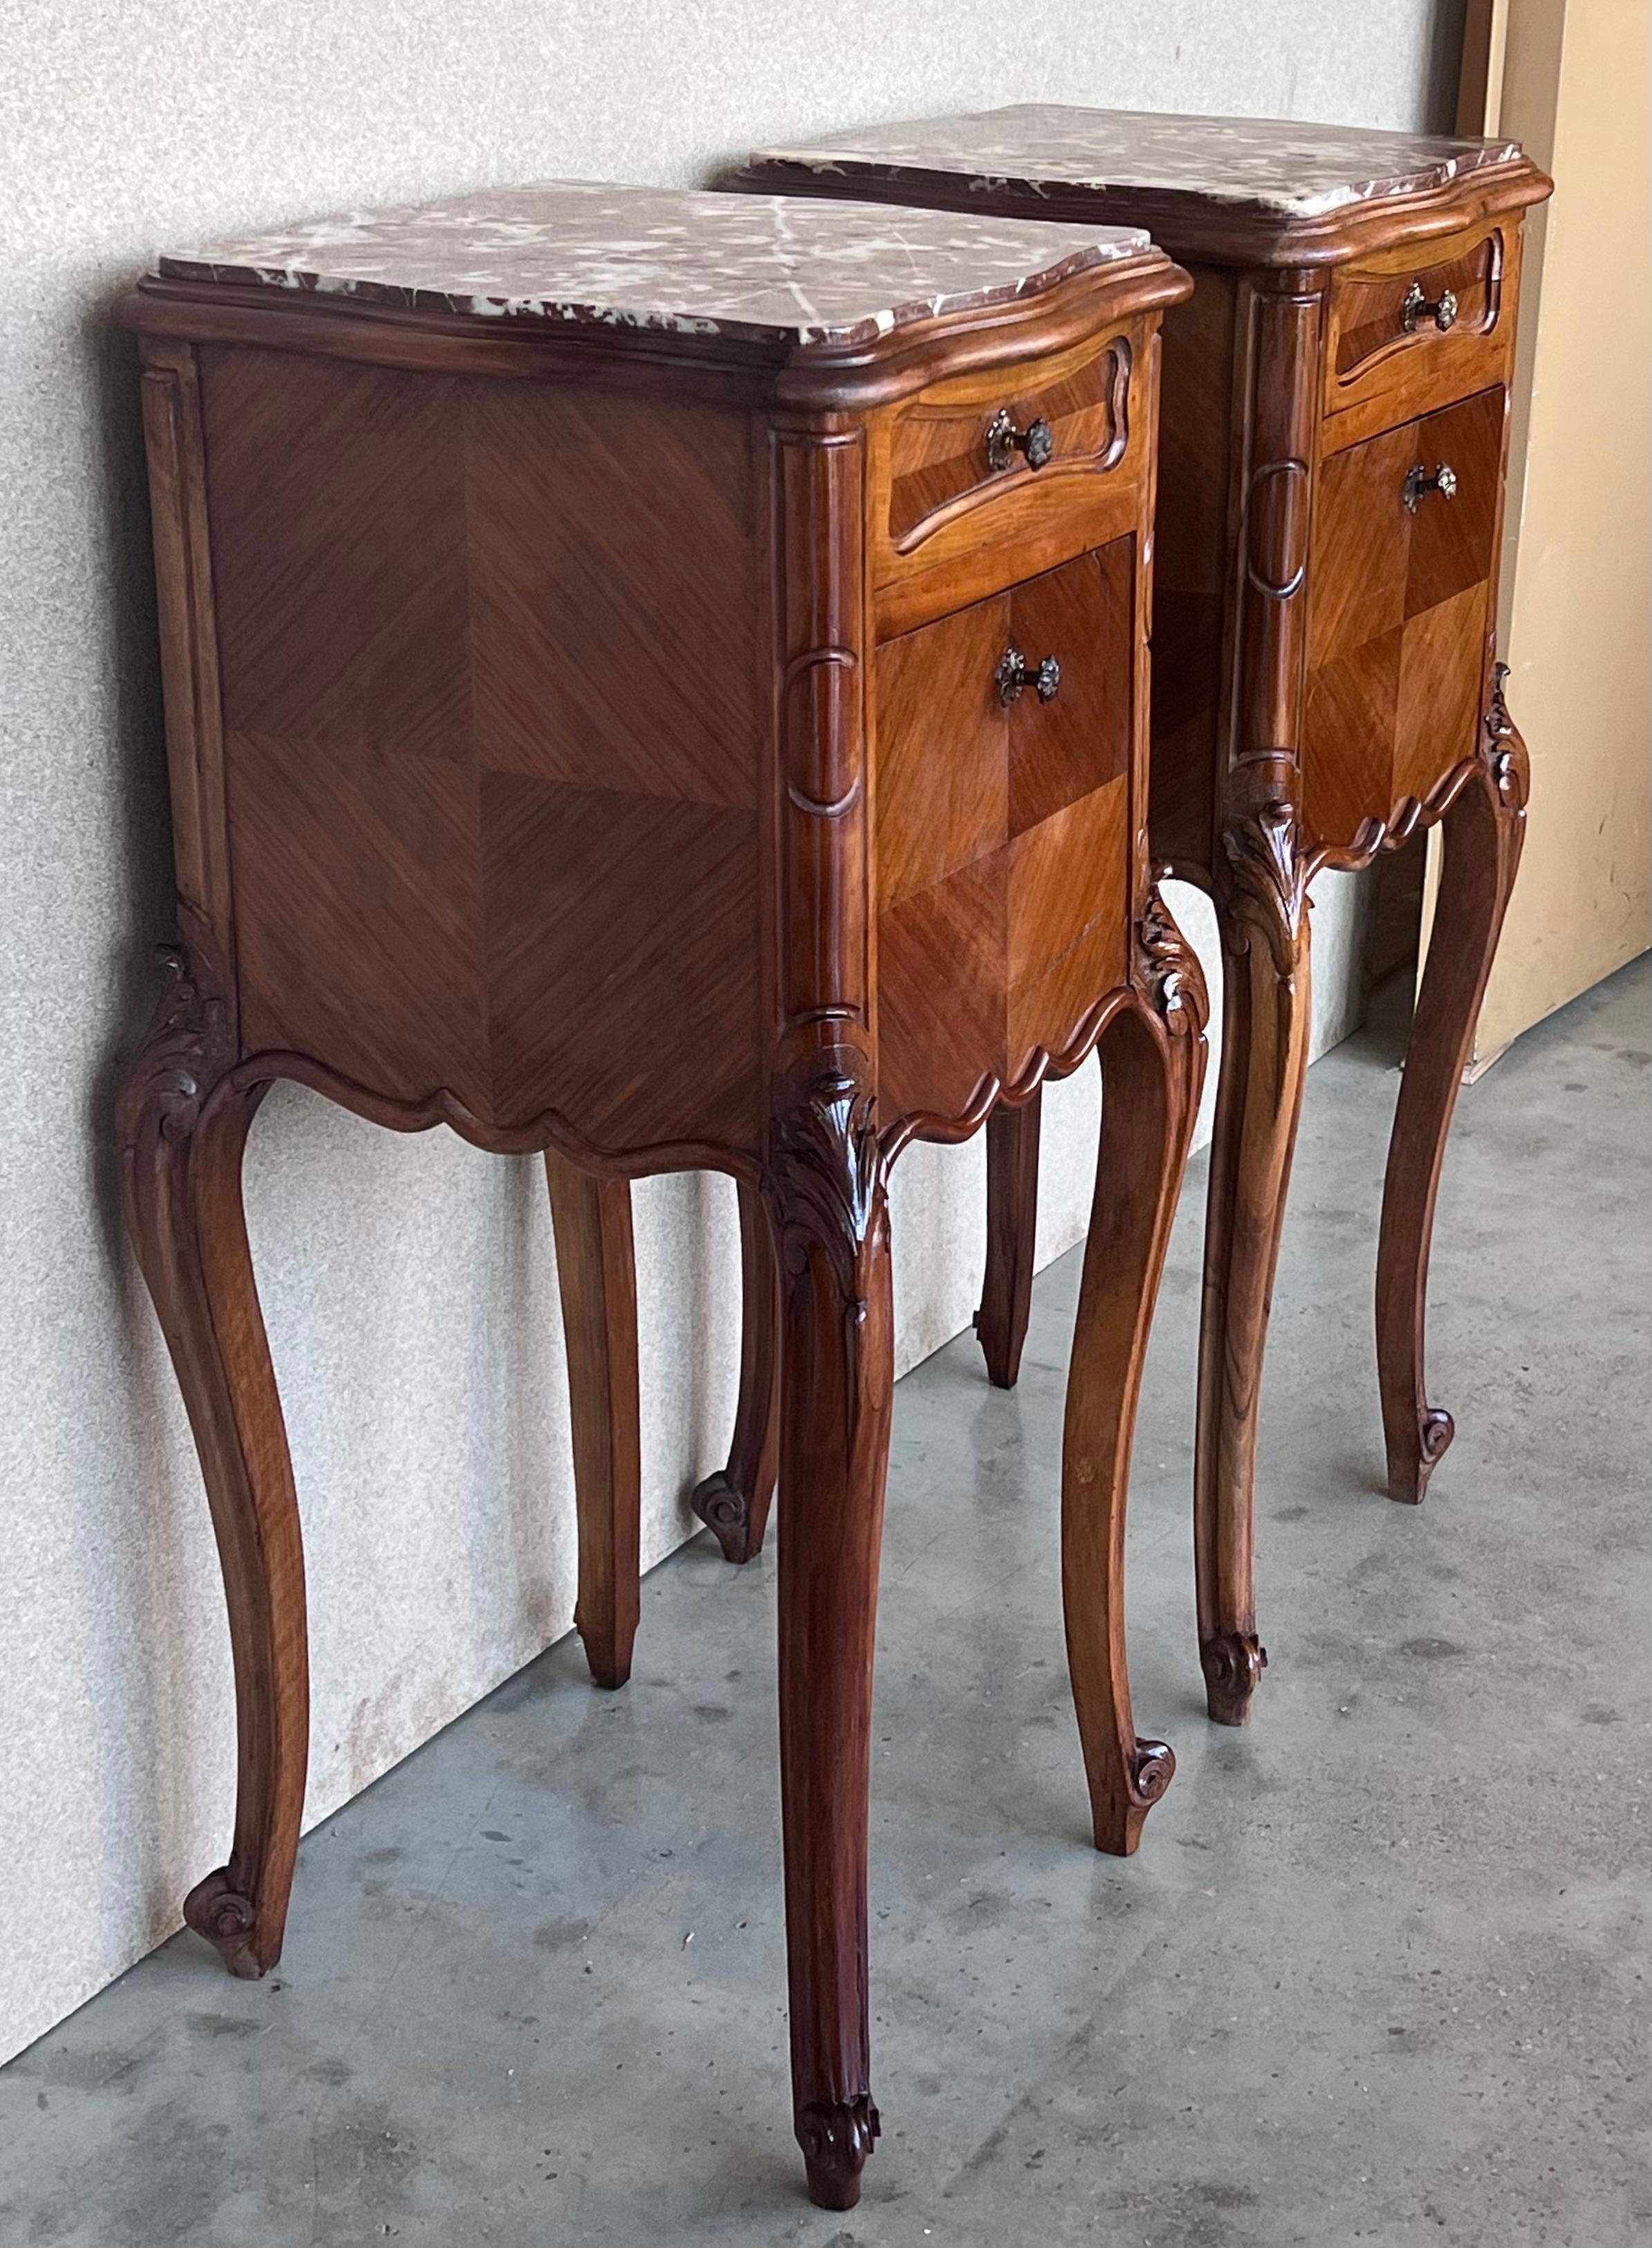 Pair Antique French Louis XV marble top nightstands will make great companions in any room! 
Handcrafted from solid oak to last for generations, each has been adorned with carved detail on the four boldly scrolled cabriole legs embellished with